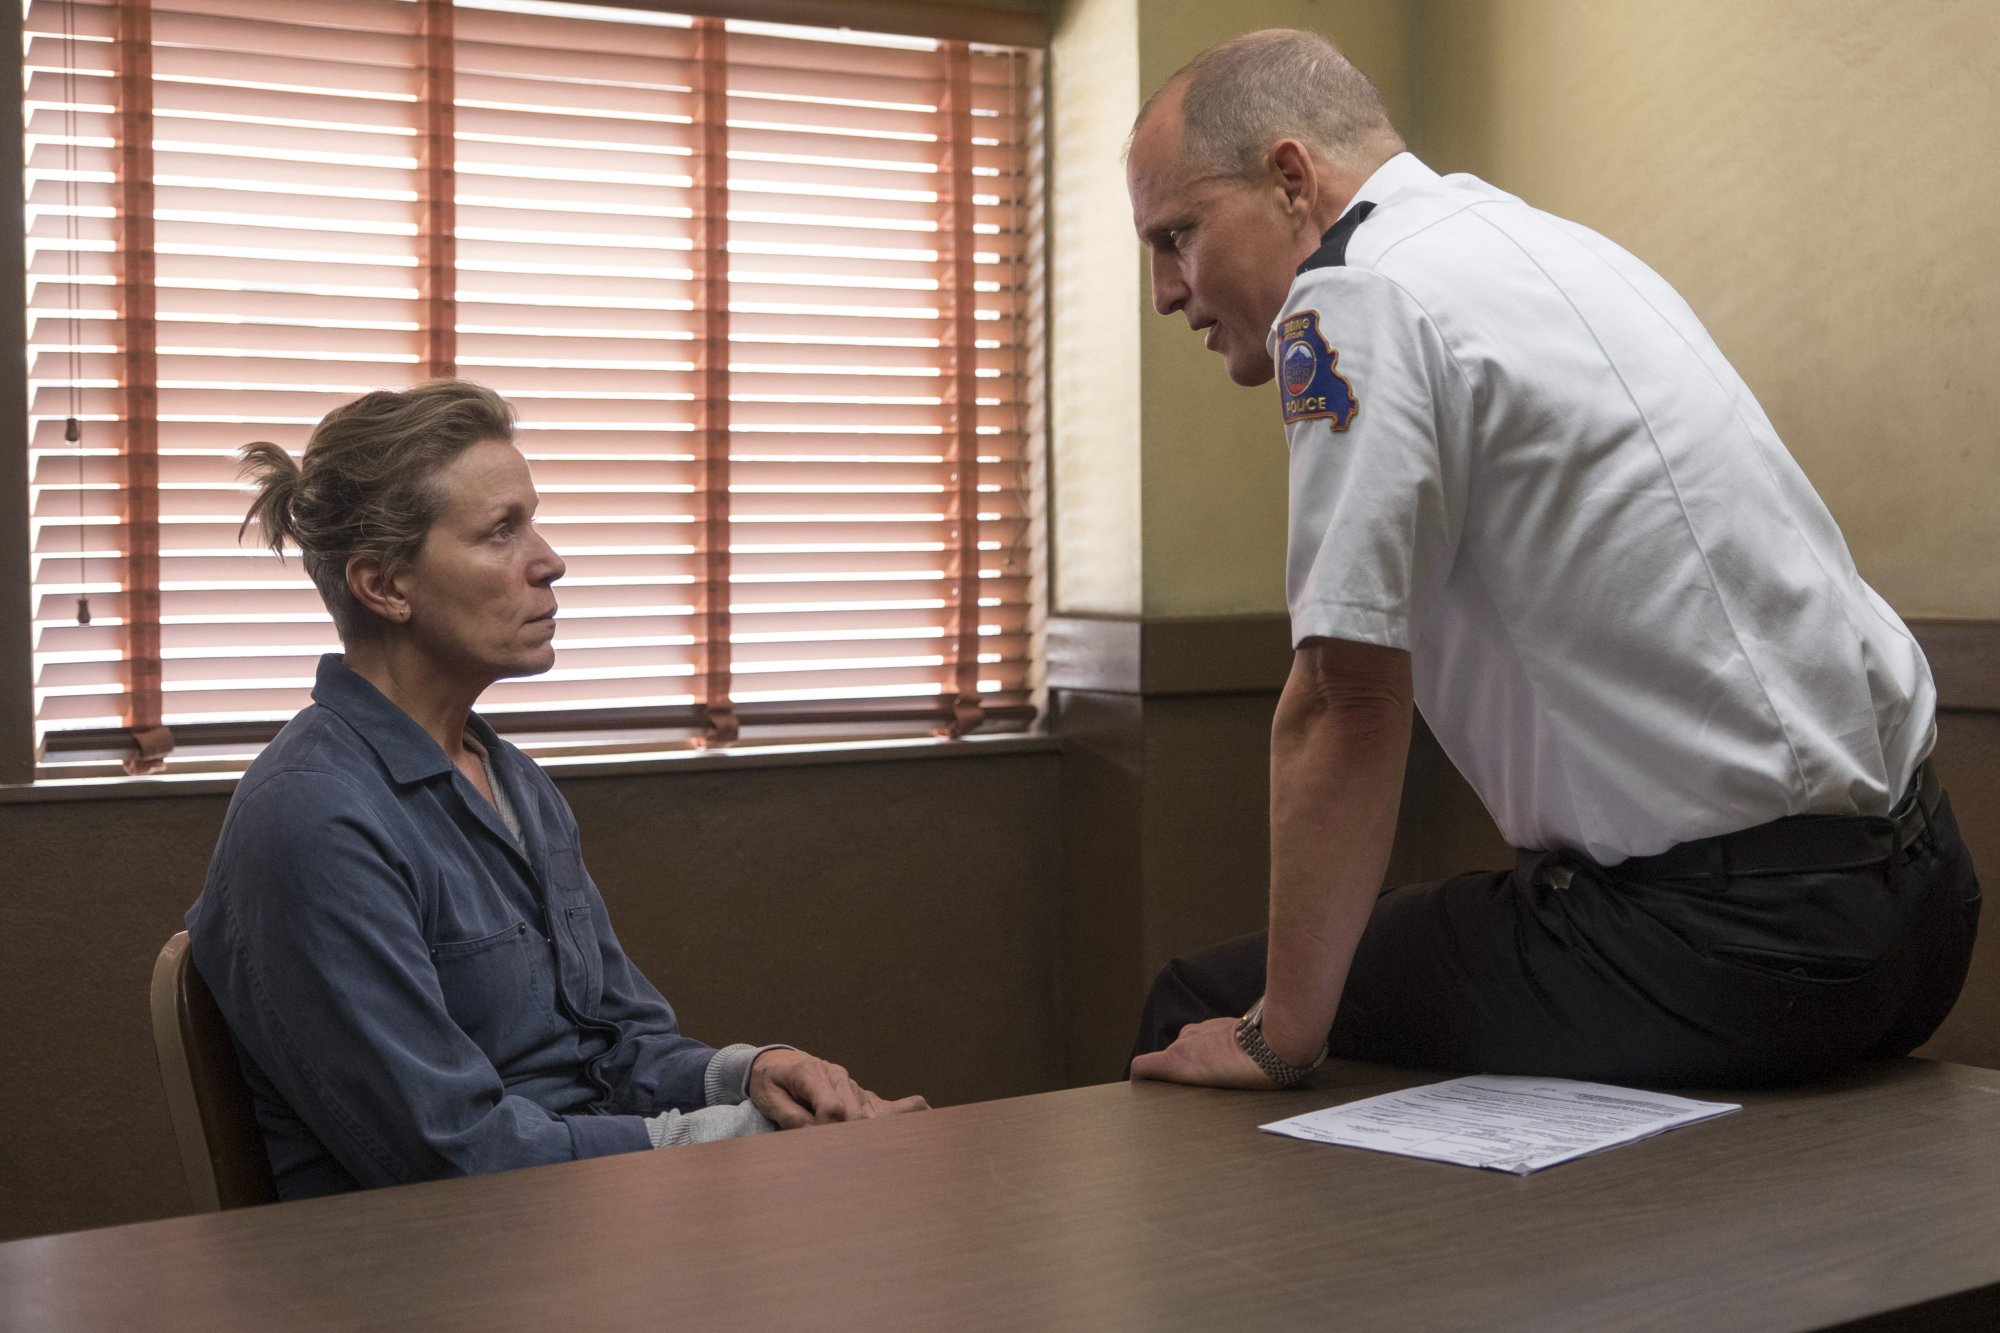 The Italian Rêve – Three Billboards Outside Ebbing, Missouri: And the Oscar  Goes To... – Lists&Reviews